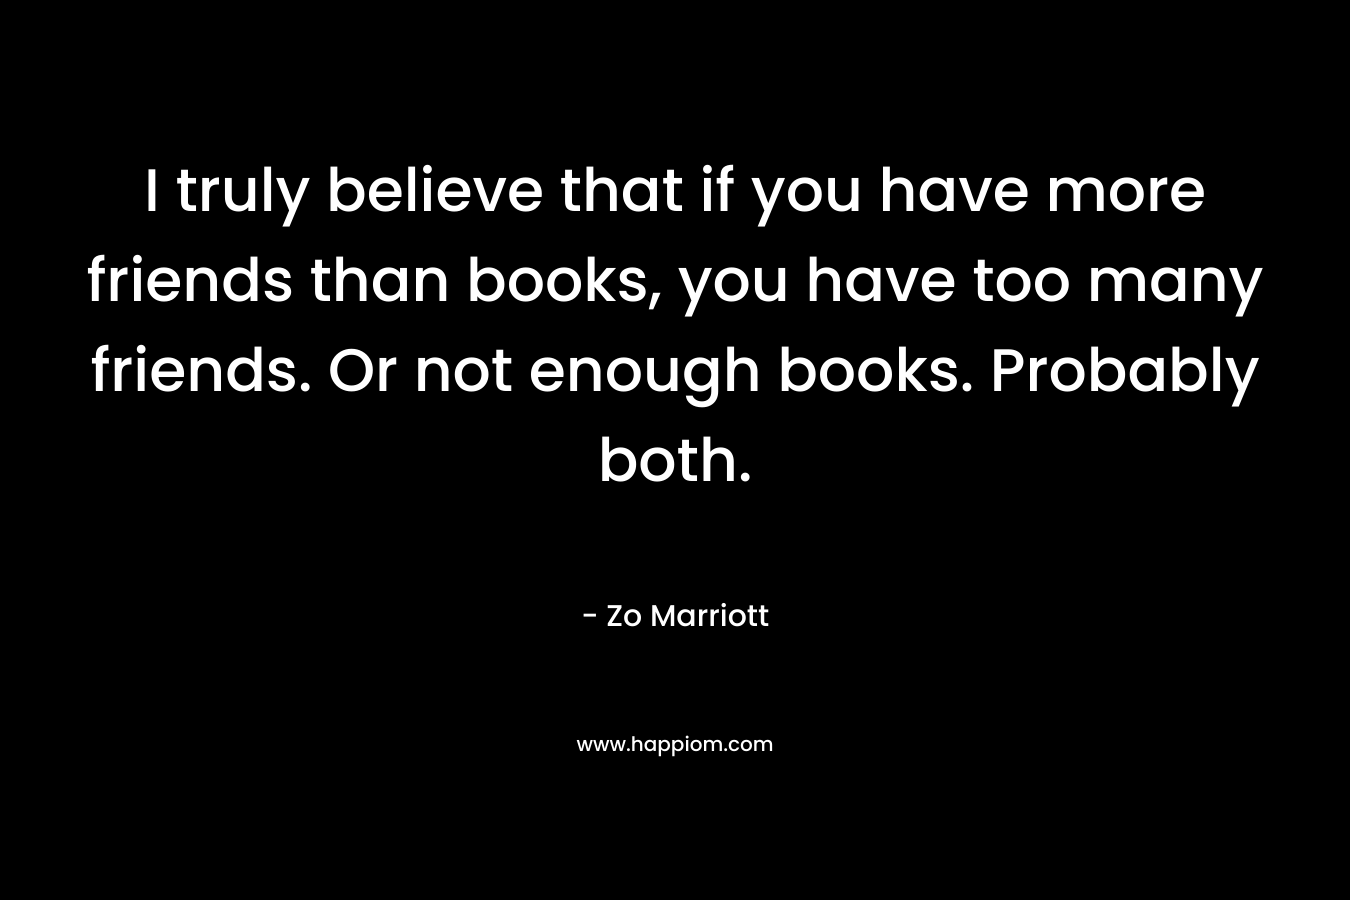 I truly believe that if you have more friends than books, you have too many friends. Or not enough books. Probably both.